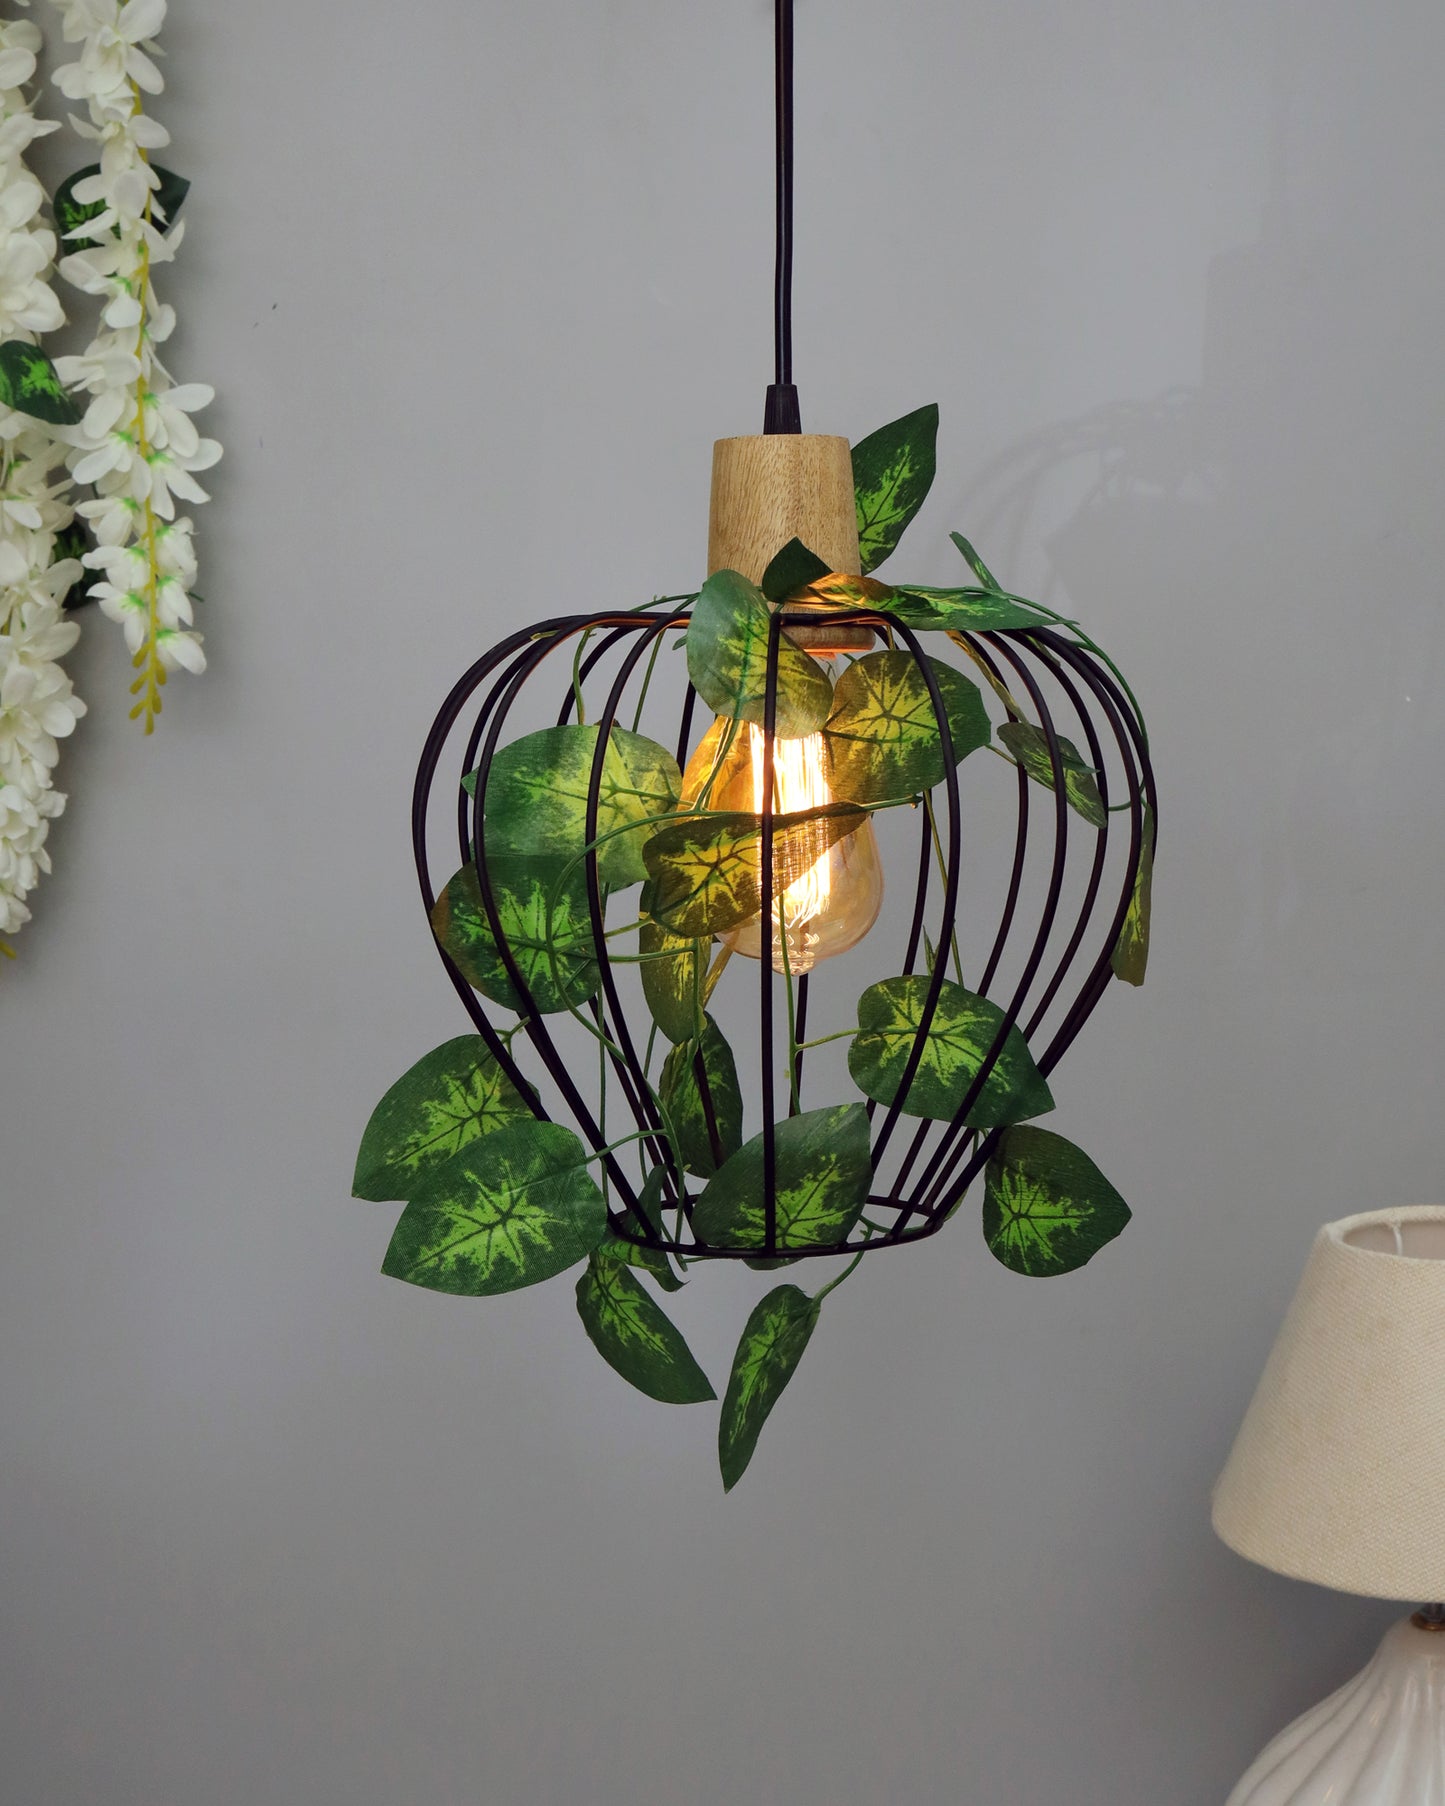 Hanging Pendant Plant Light Fixtures Creative Home Decor Living Room Dining, Ceiling light with leafy vine and filament bulb, Taper Wood Chimney